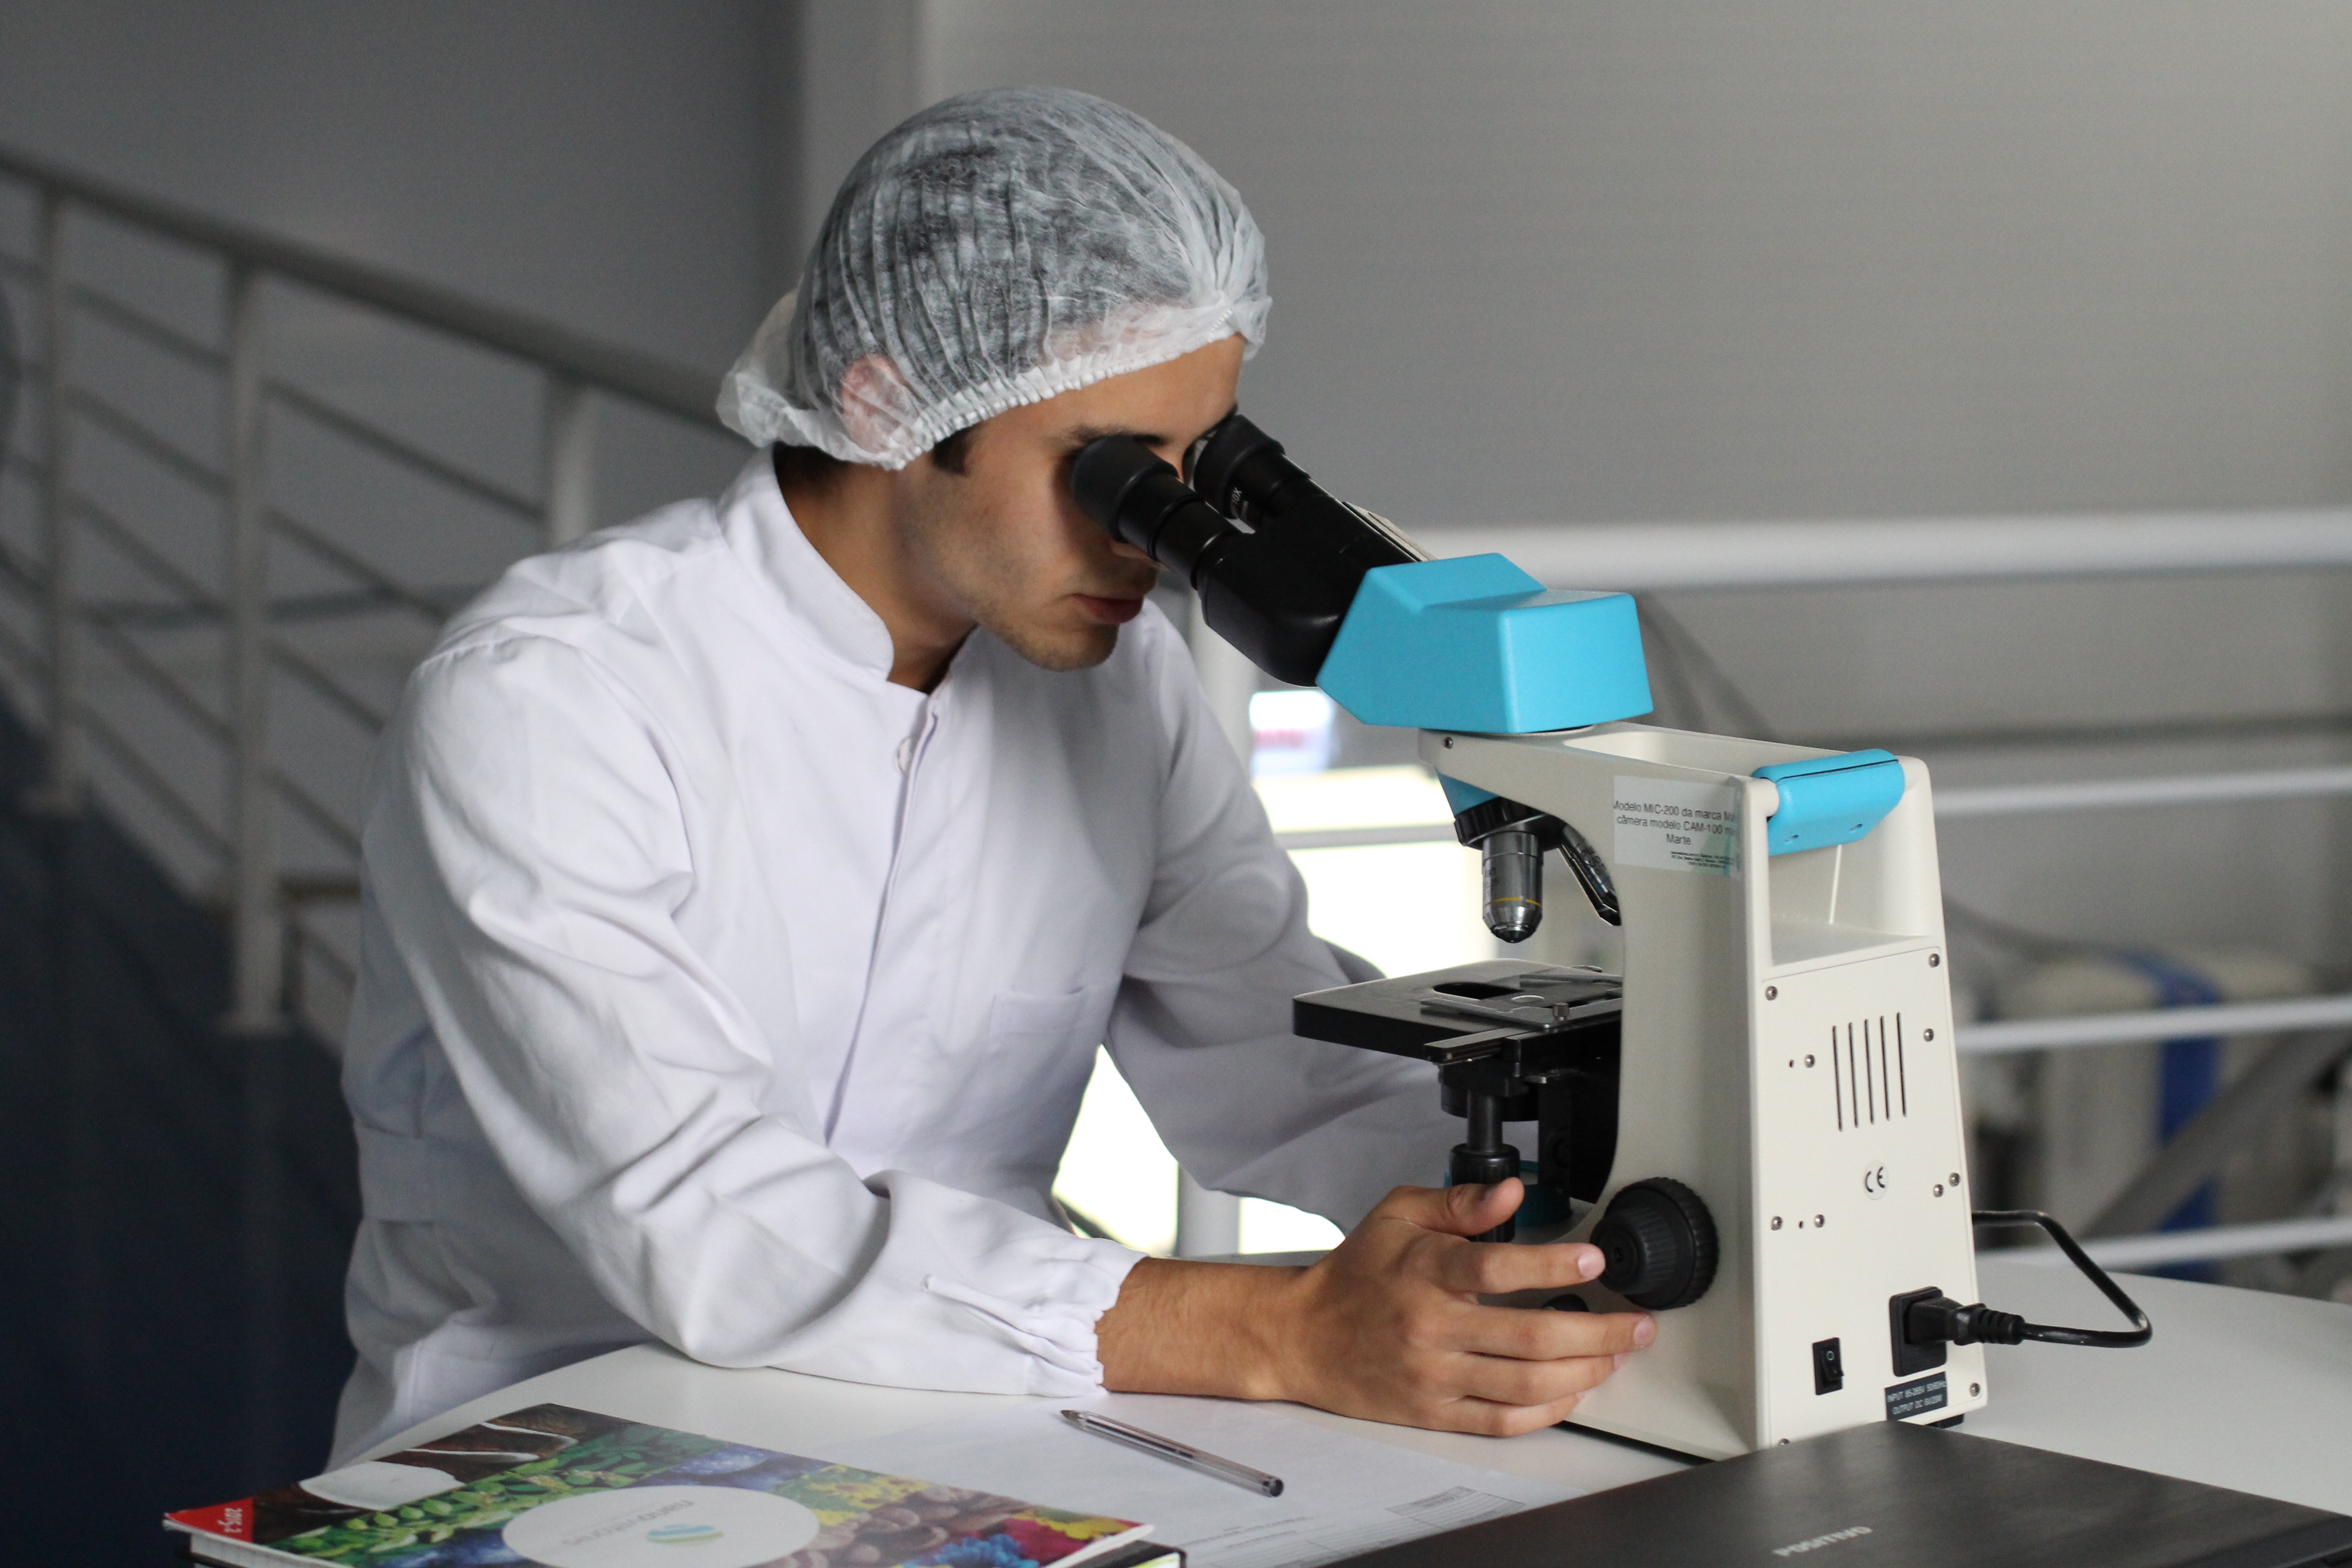 Scientist looking into microscope